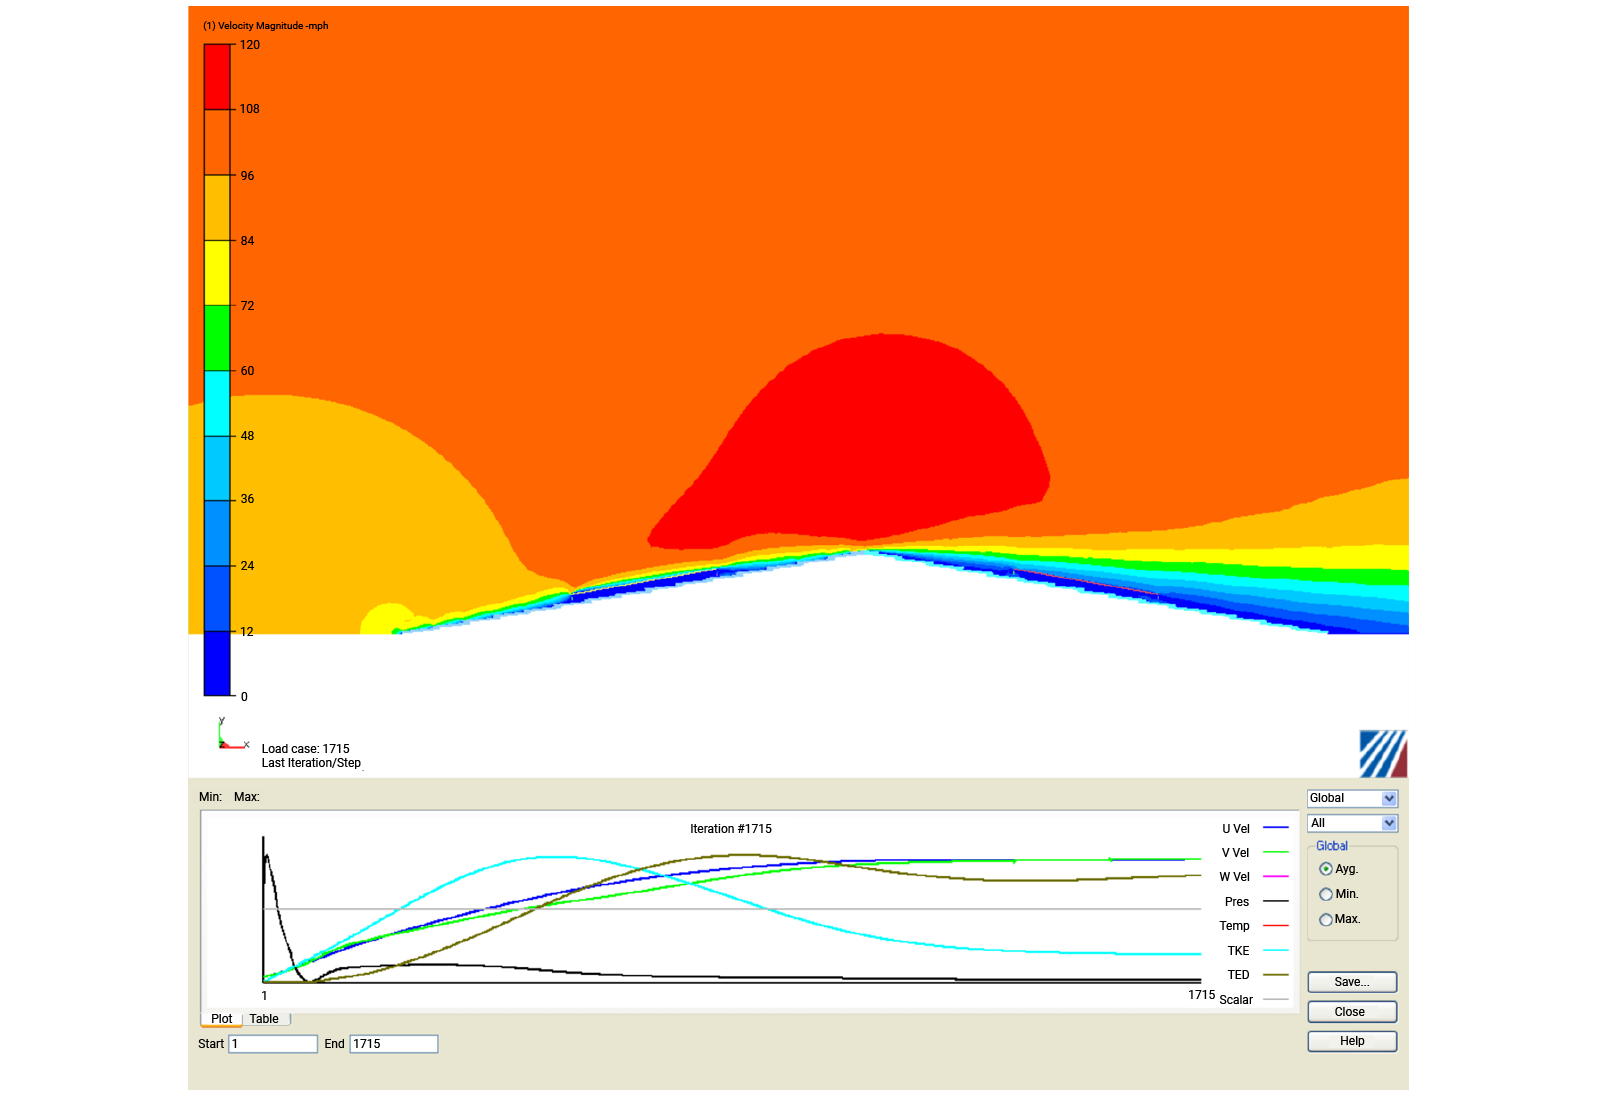 The complete CFD model is shown with the velocity flow patterns over the panel and the eave of the roof - Predictive Engineering CFD Consulting Services